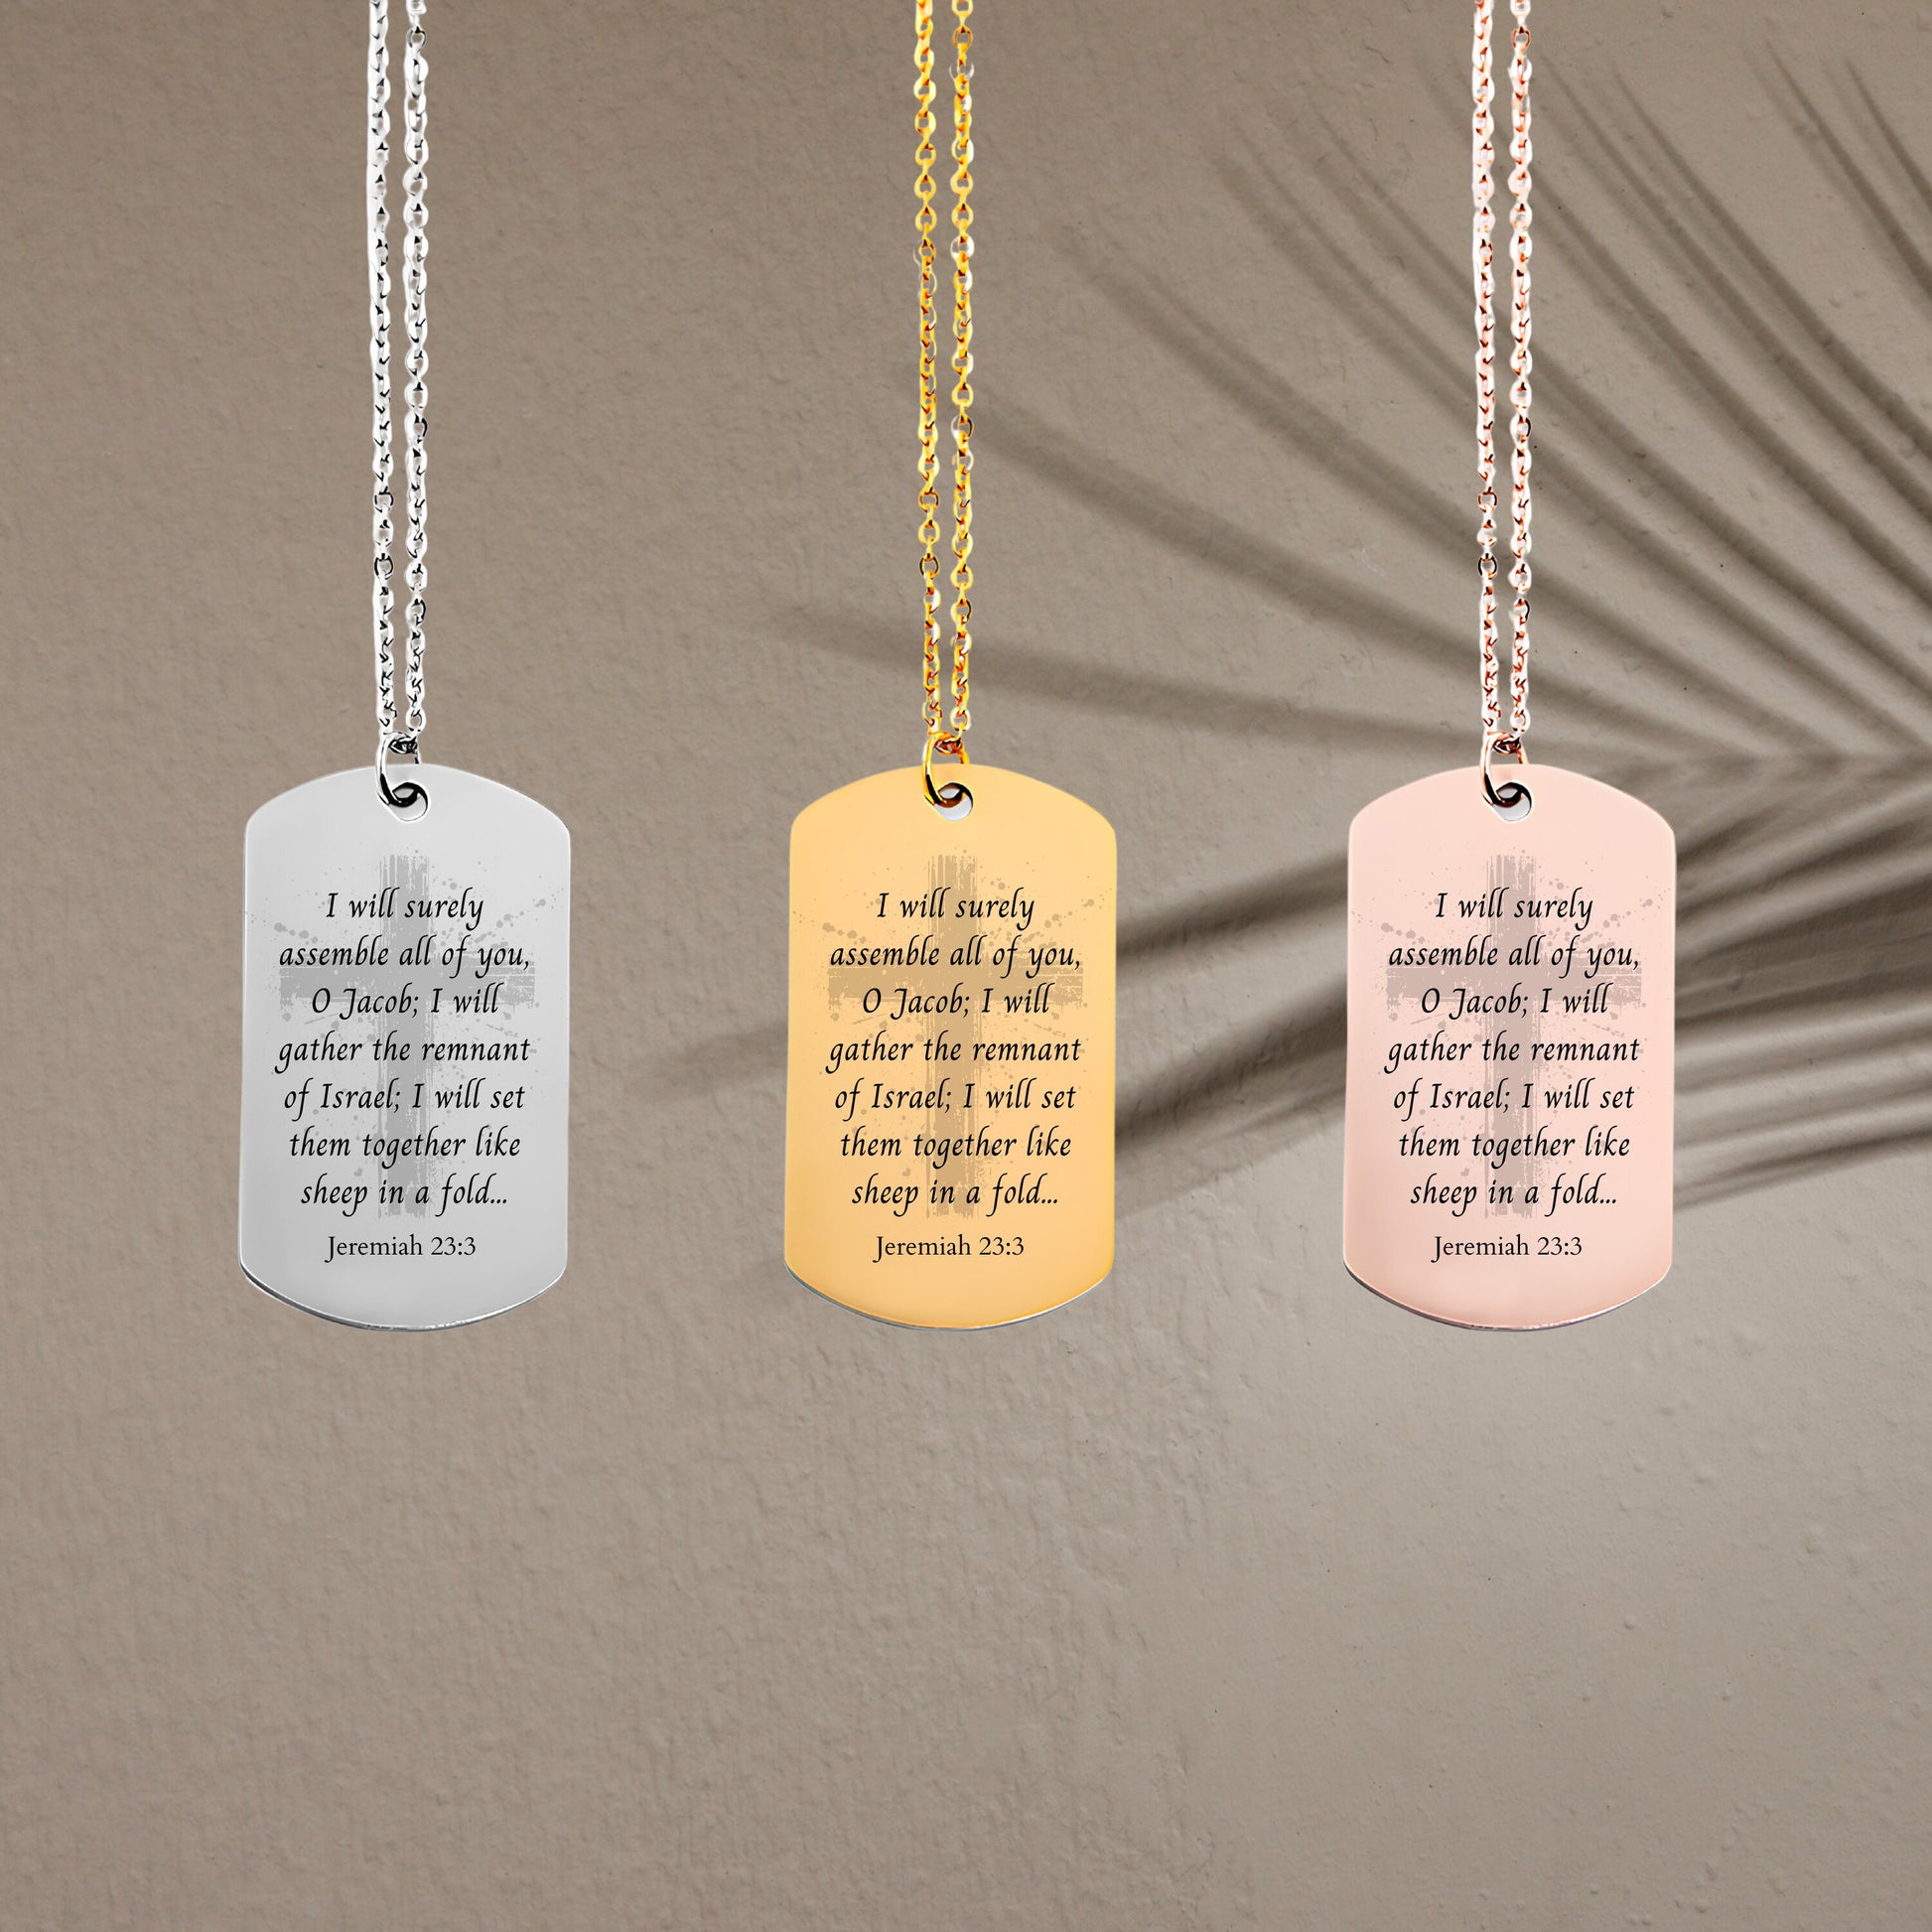 Jeremiah 23 3 quote necklace - Personalizable Jewelry